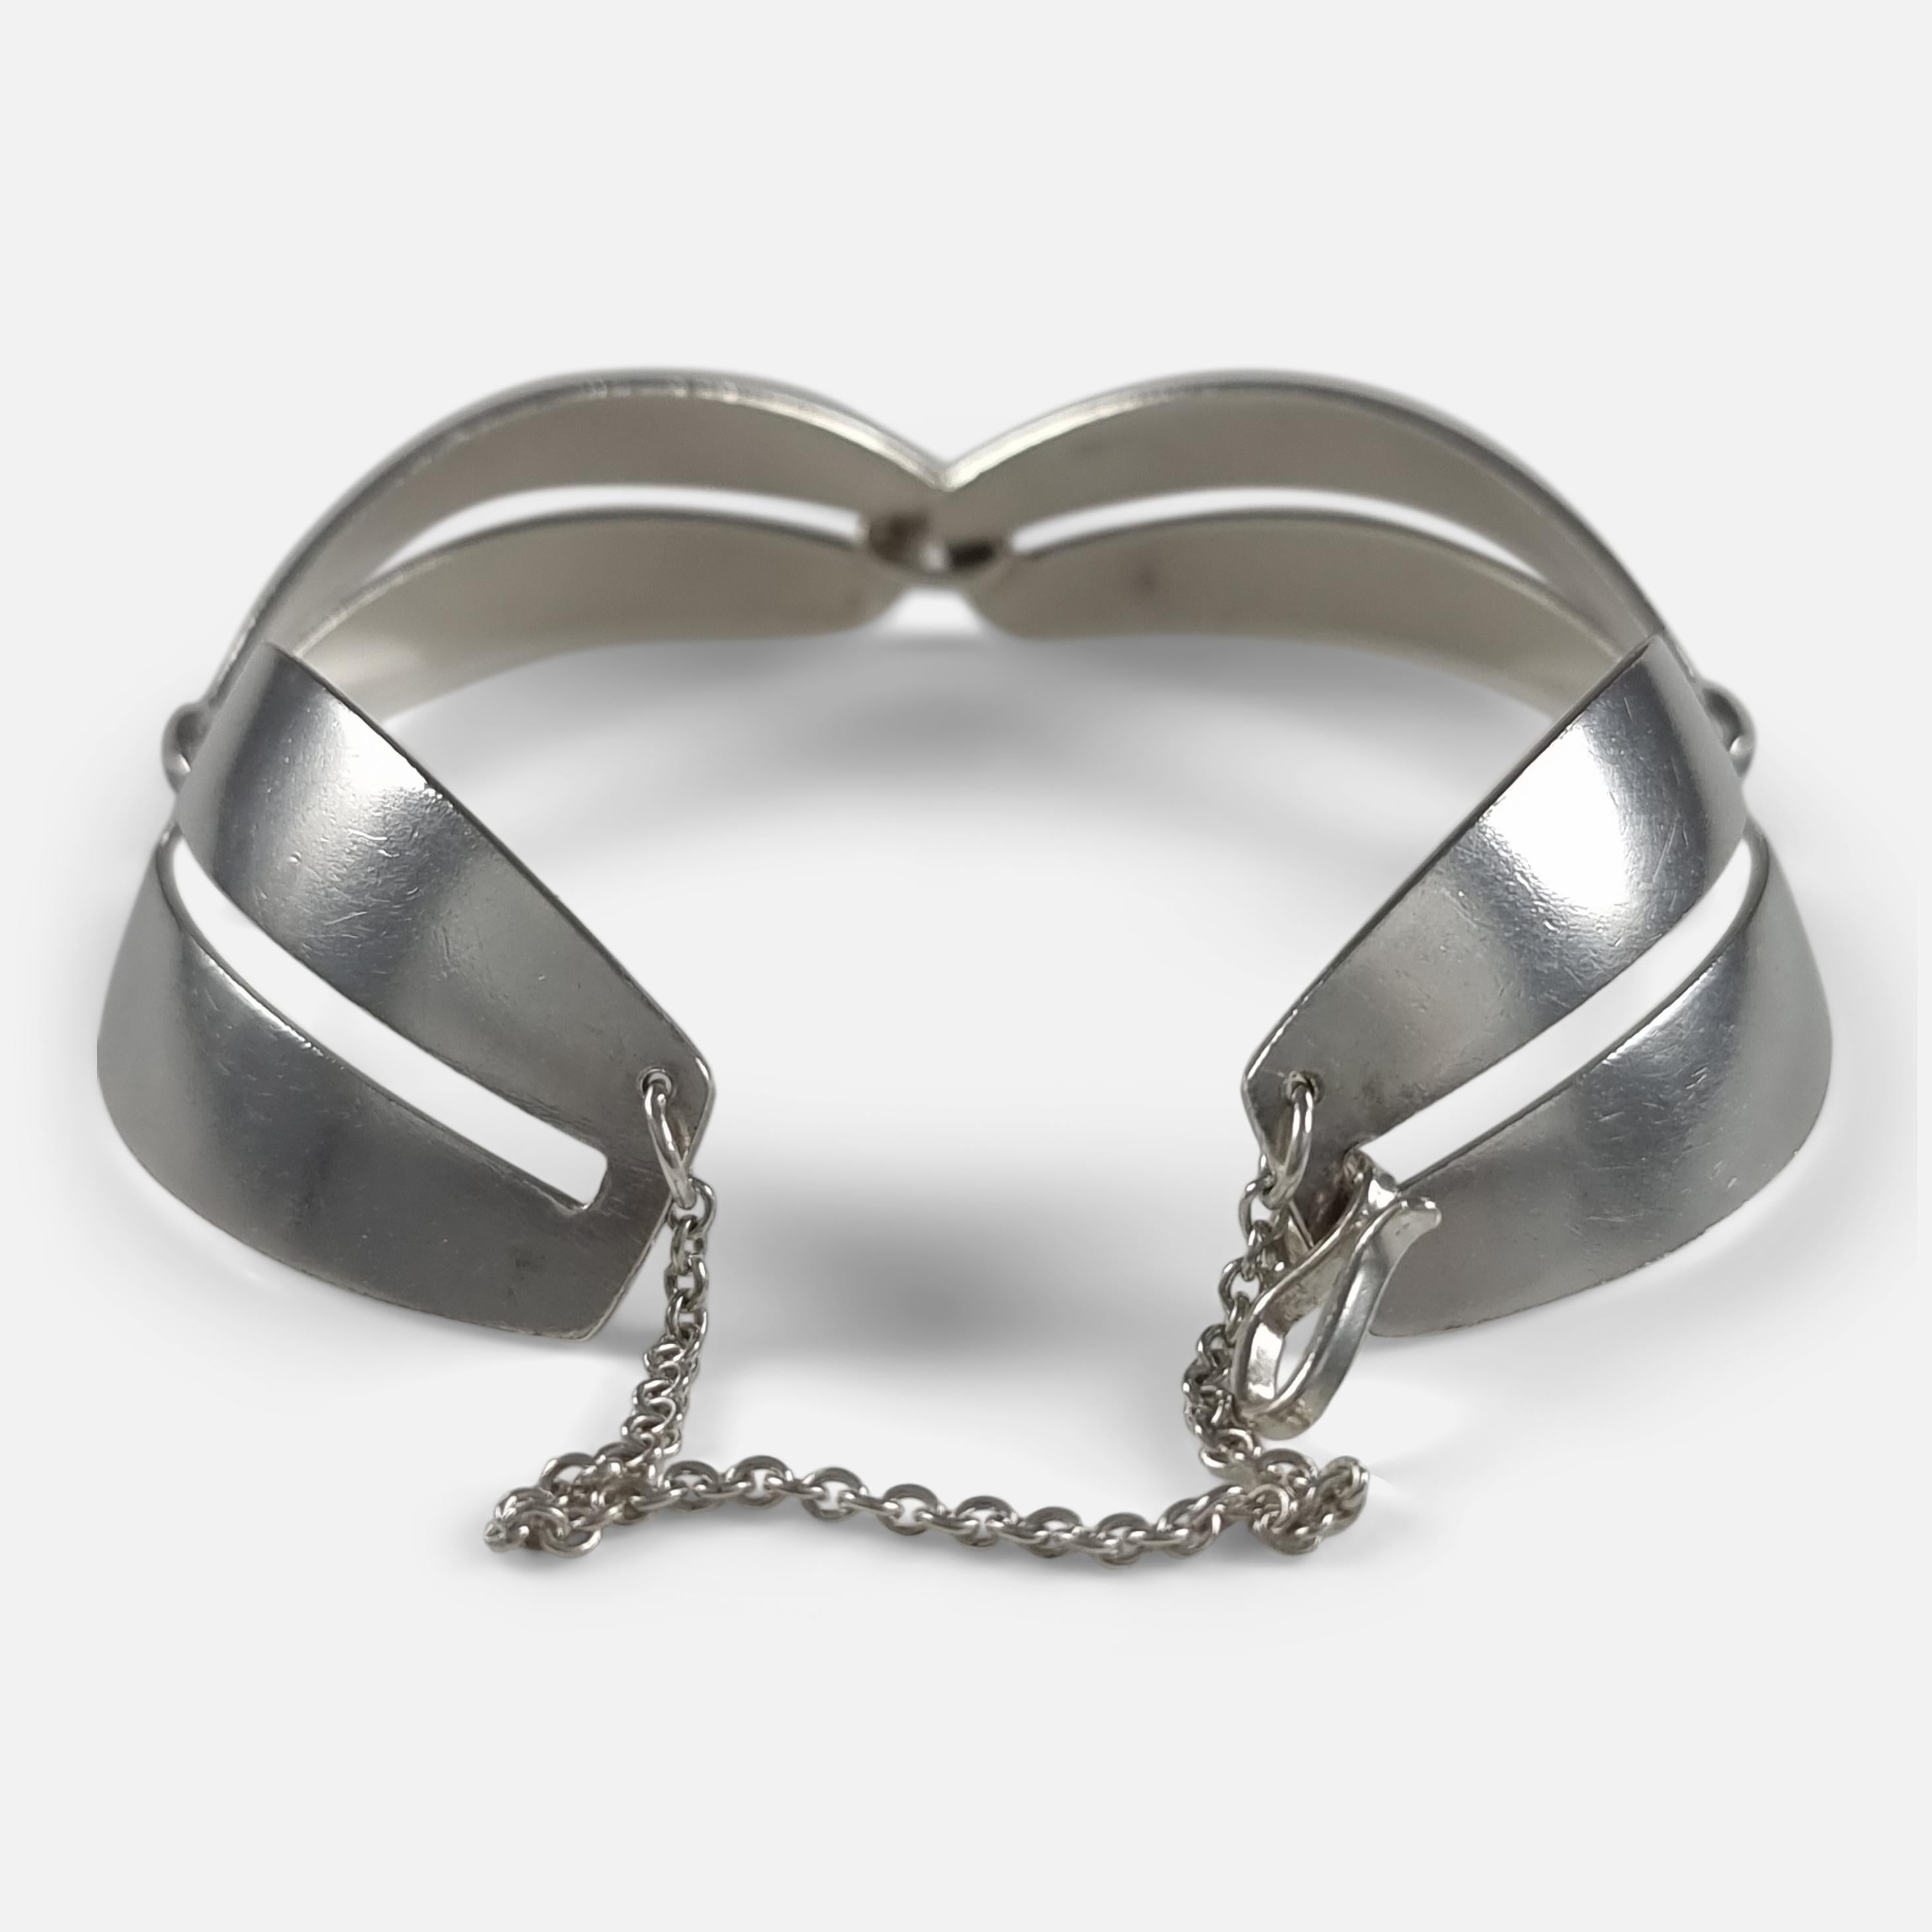 A sterling silver bracelet #170, designed by Nanna Ditzel for Georg Jensen.

Stamped with post-1945 Georg Jensen marks, '925S Denmark', '170', and with London import marks for 1967.

Period: - Late 20th century.

Engraving: - None.

Measurement: -